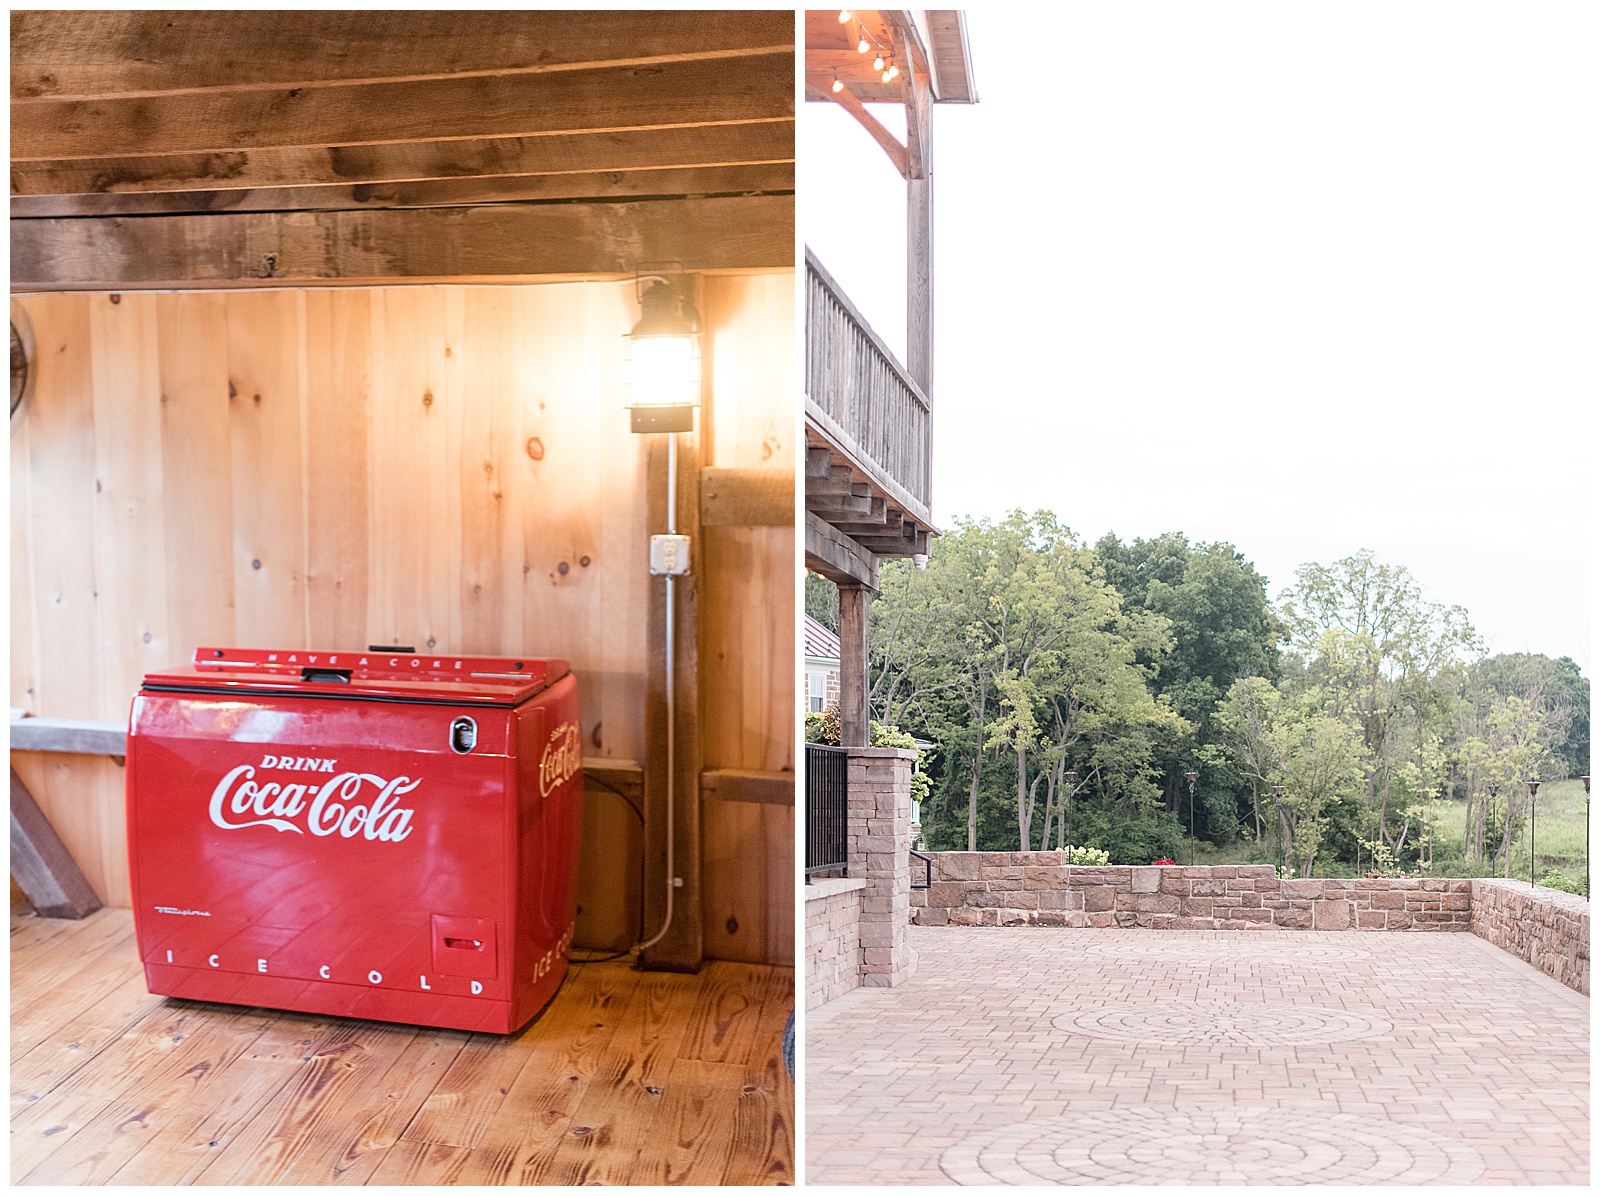 interior barn basement photo of vintage red Coca Cola deep freezer refrigerator against wooden wall with wooden floor at Spring Valley Farms in Dover, PA, close up exterior photo of corner of barn and deck area with pathway along row of trees at Spring Valley Farms in Dover, PA